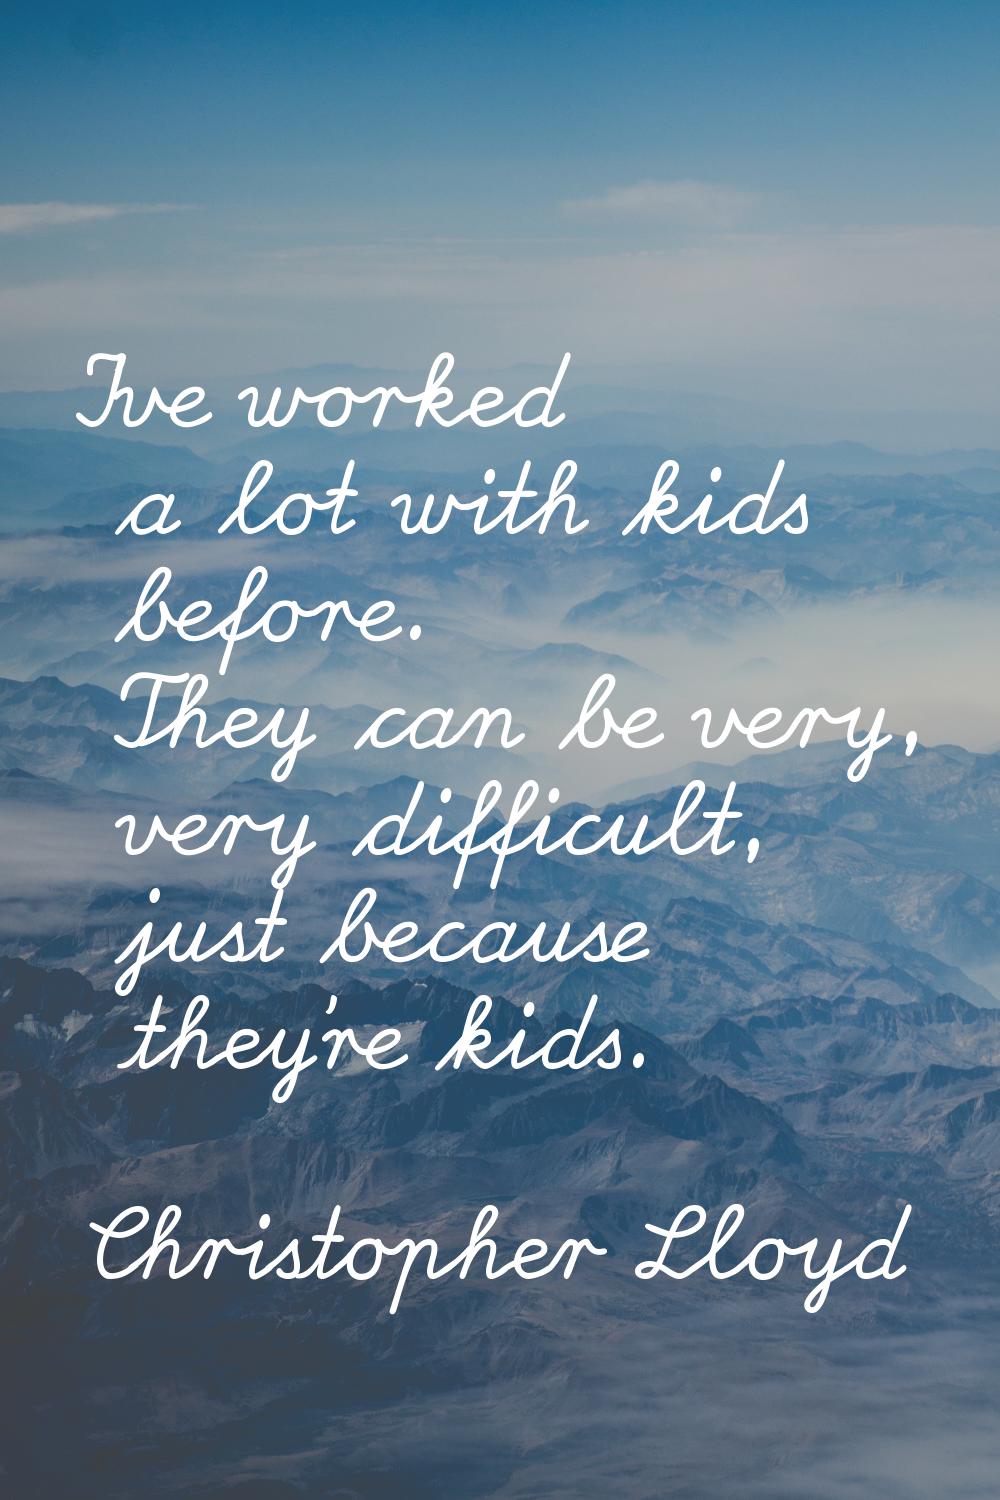 I've worked a lot with kids before. They can be very, very difficult, just because they're kids.